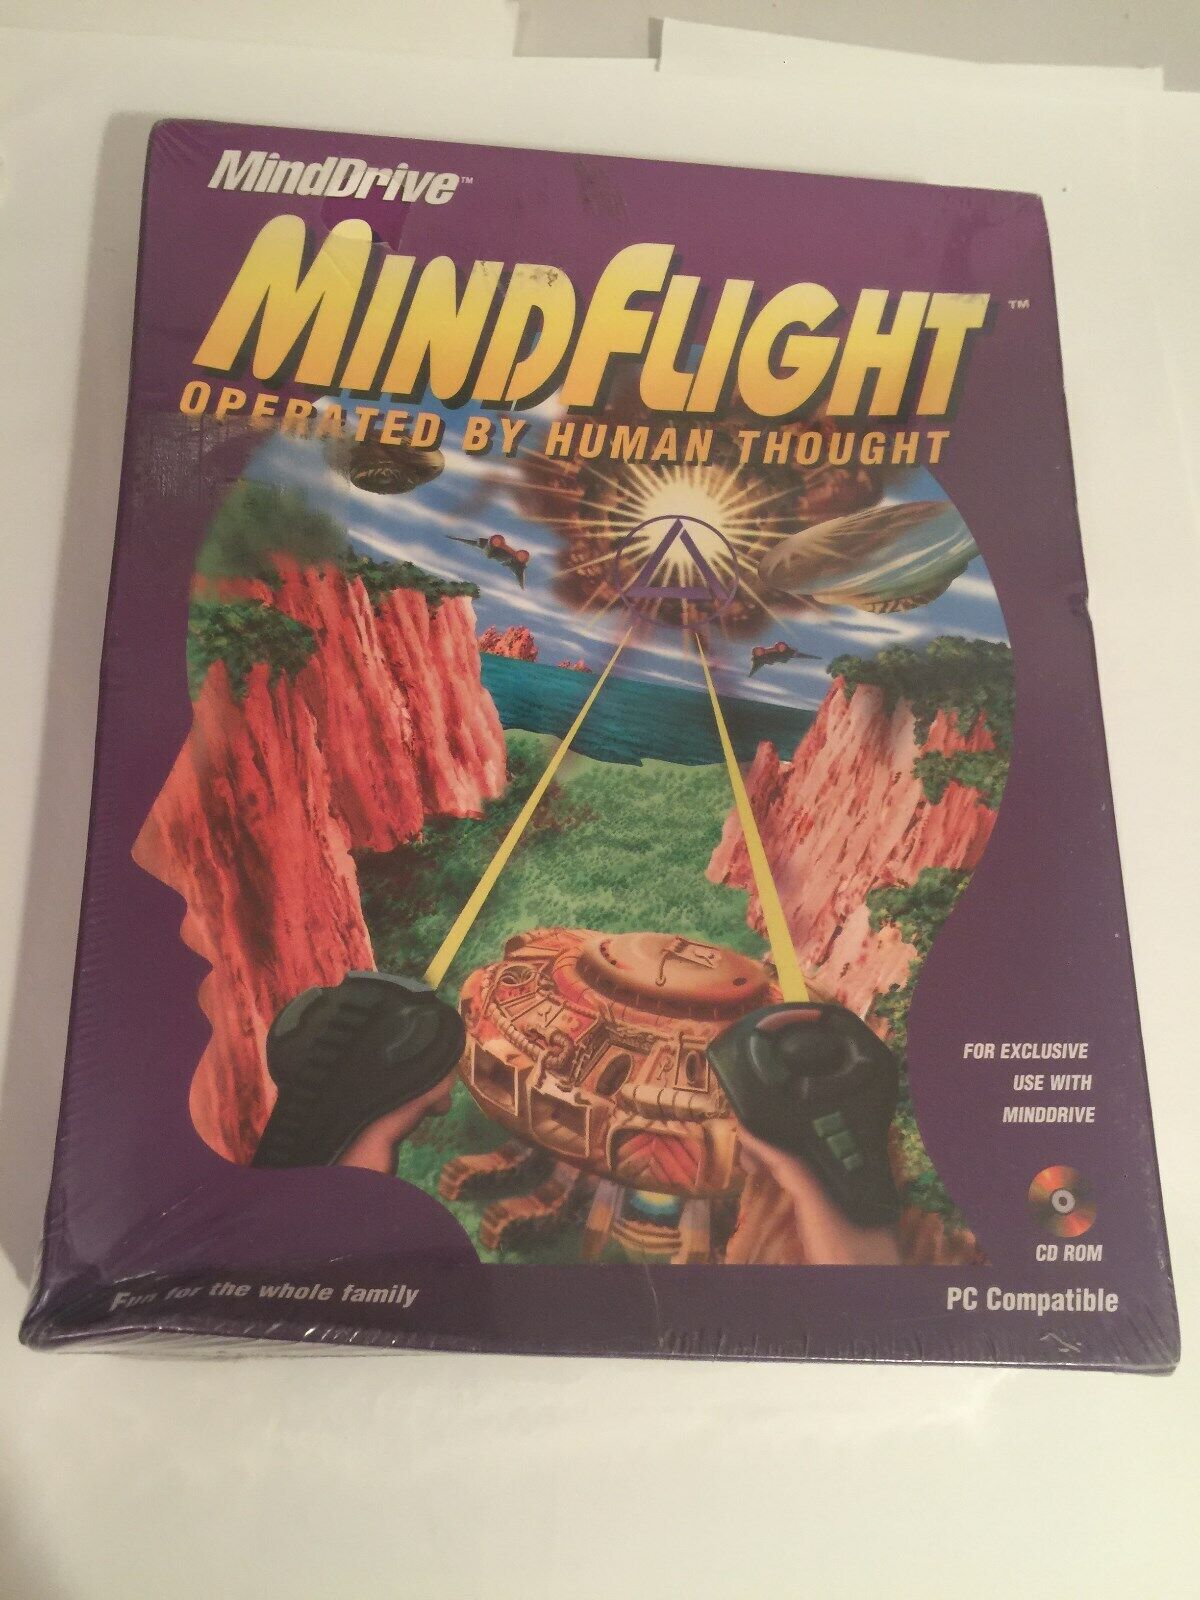 New Complete PC CD ROM  MindDrive Mind Flight Human Thought Game Vtg Box 90\'s 